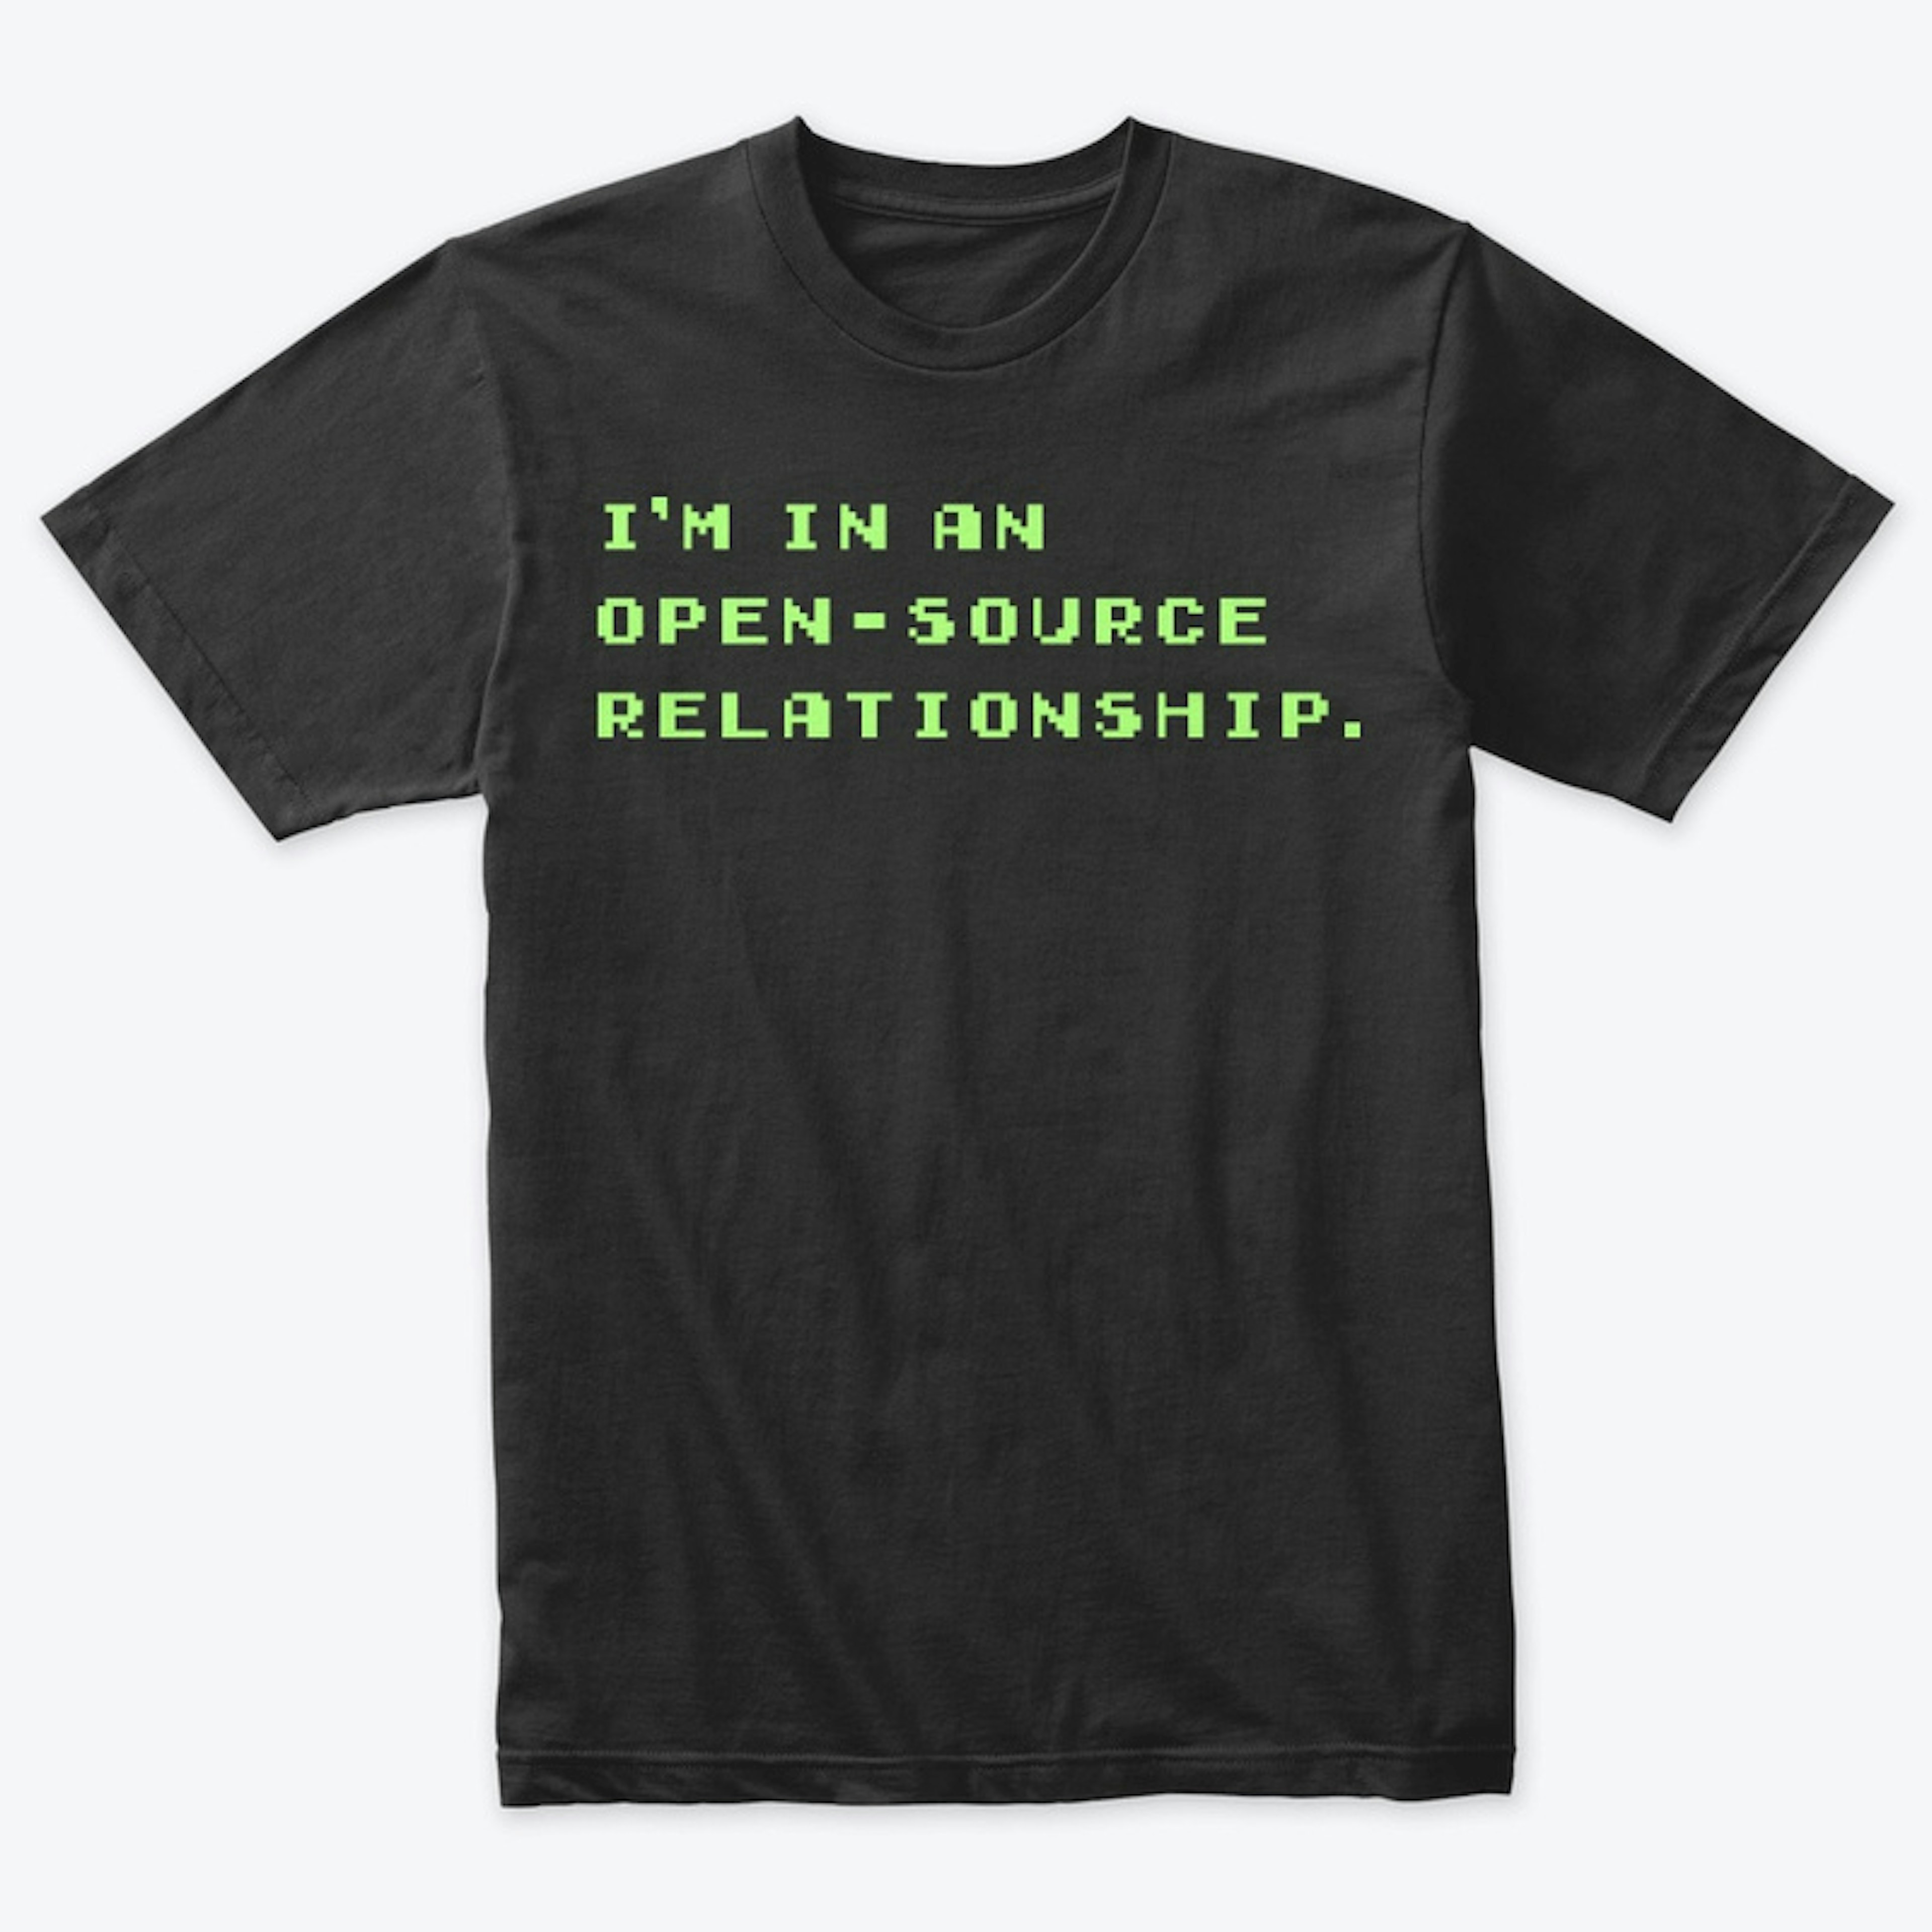 I'm In An Open Source Relations Ship